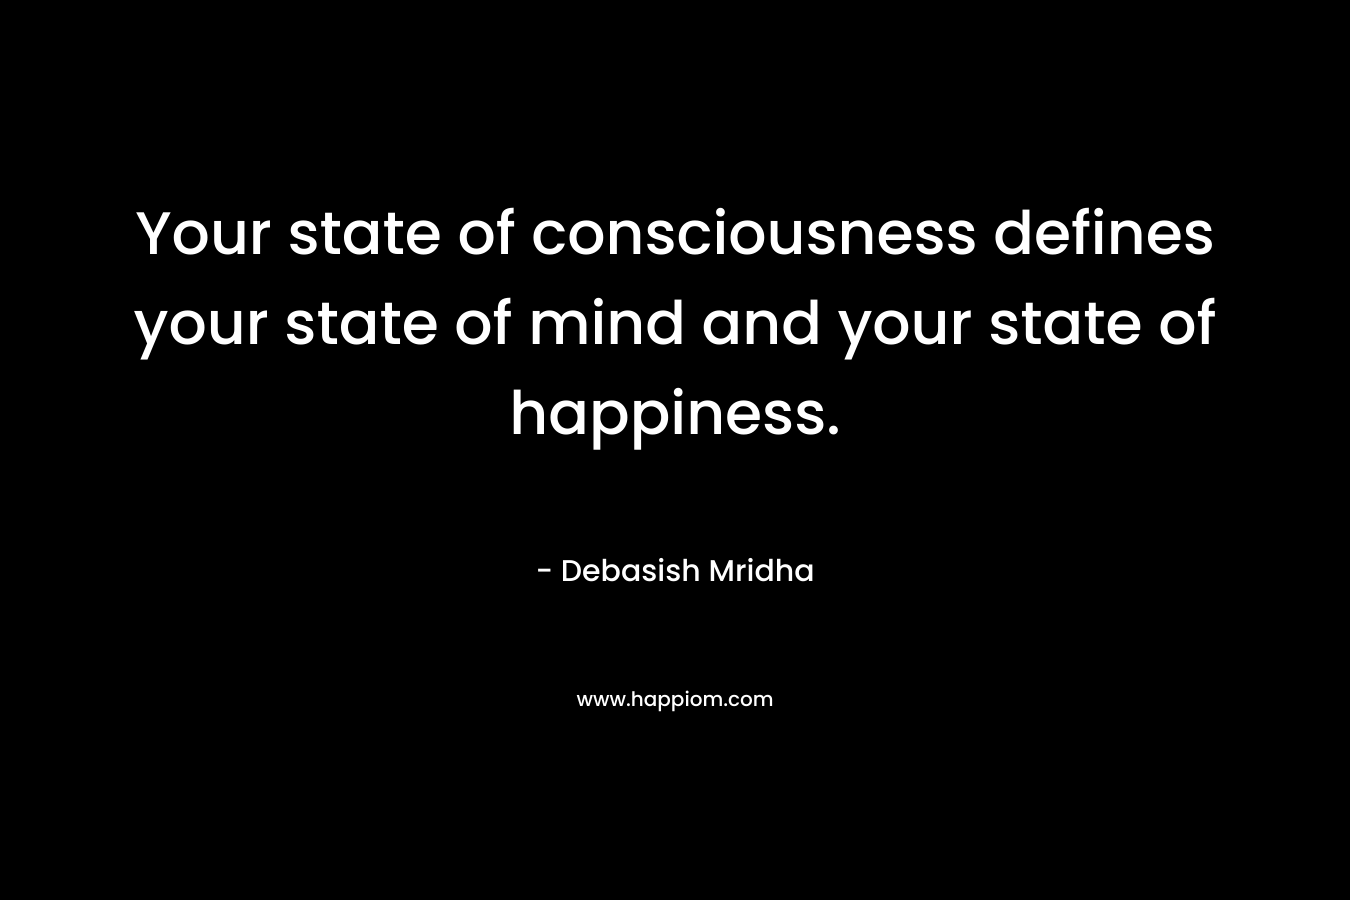 Your state of consciousness defines your state of mind and your state of happiness.